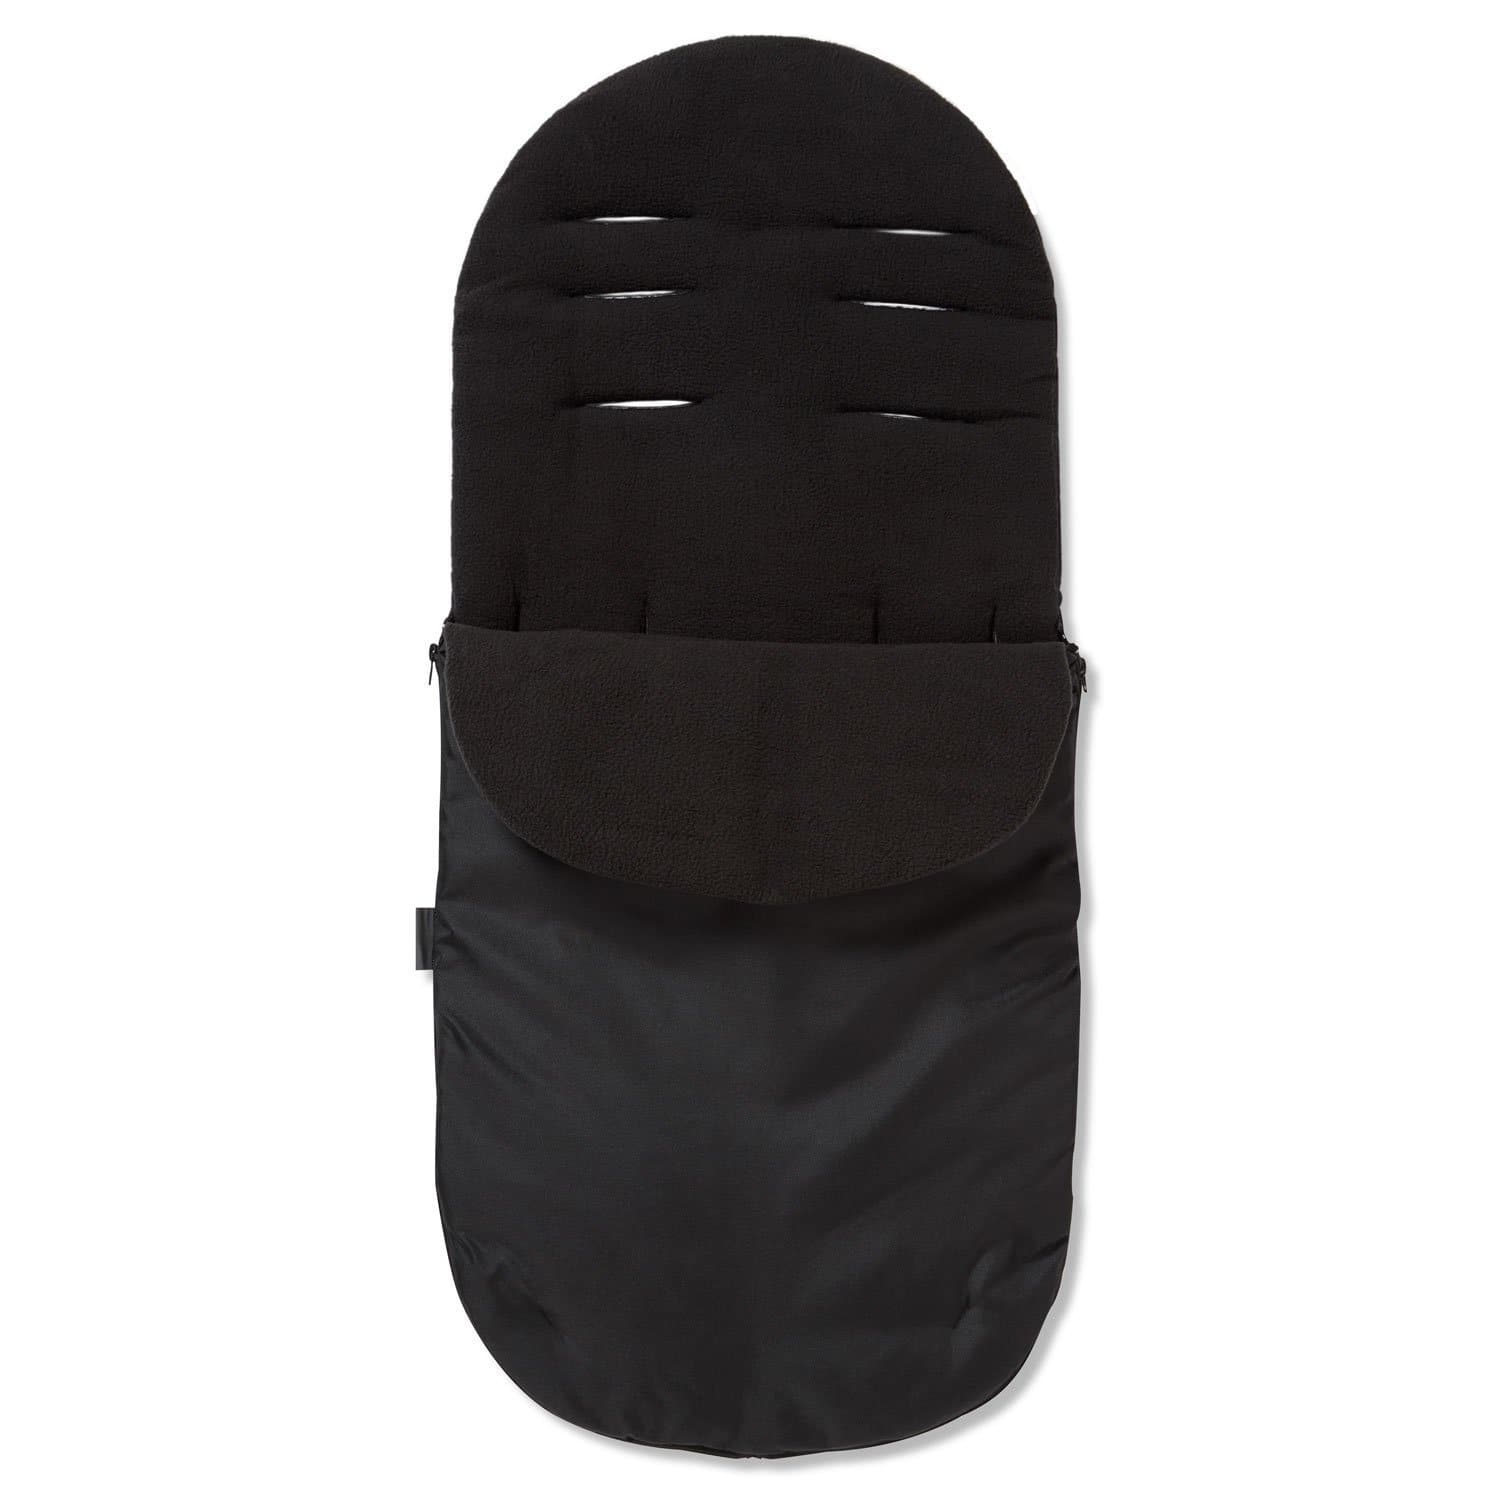 Footmuff / Cosy Toes Compatible with Noukies - Black / Fits All Models | For Your Little One